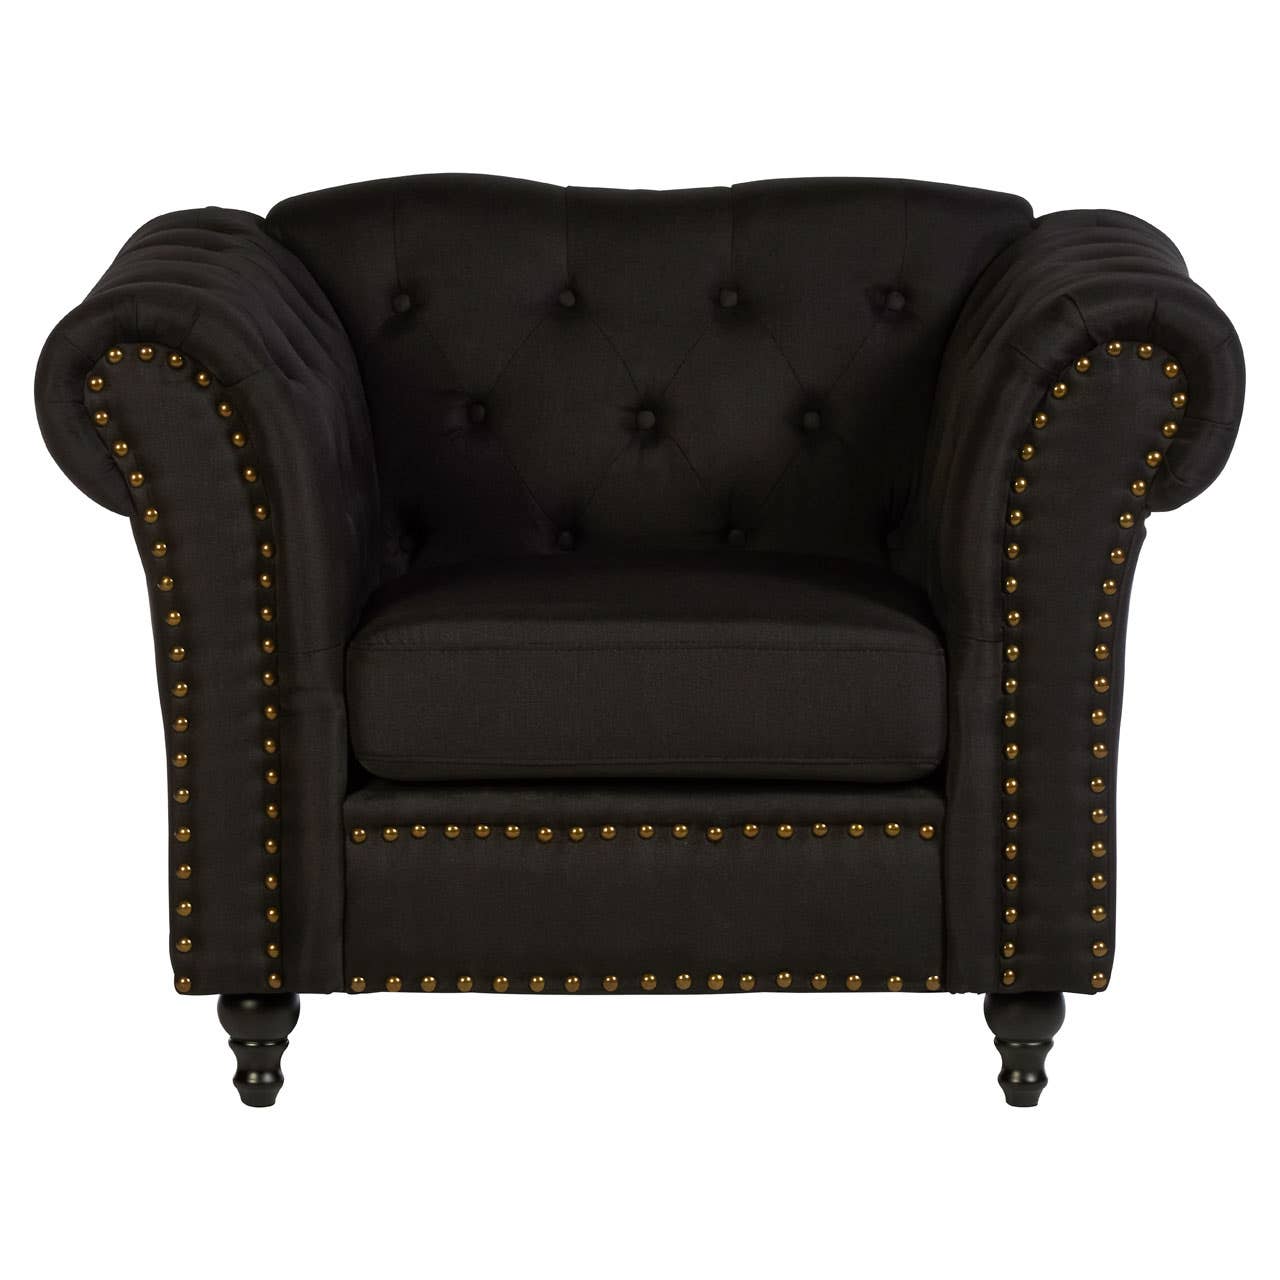 Fable Black Chesterfield Chair